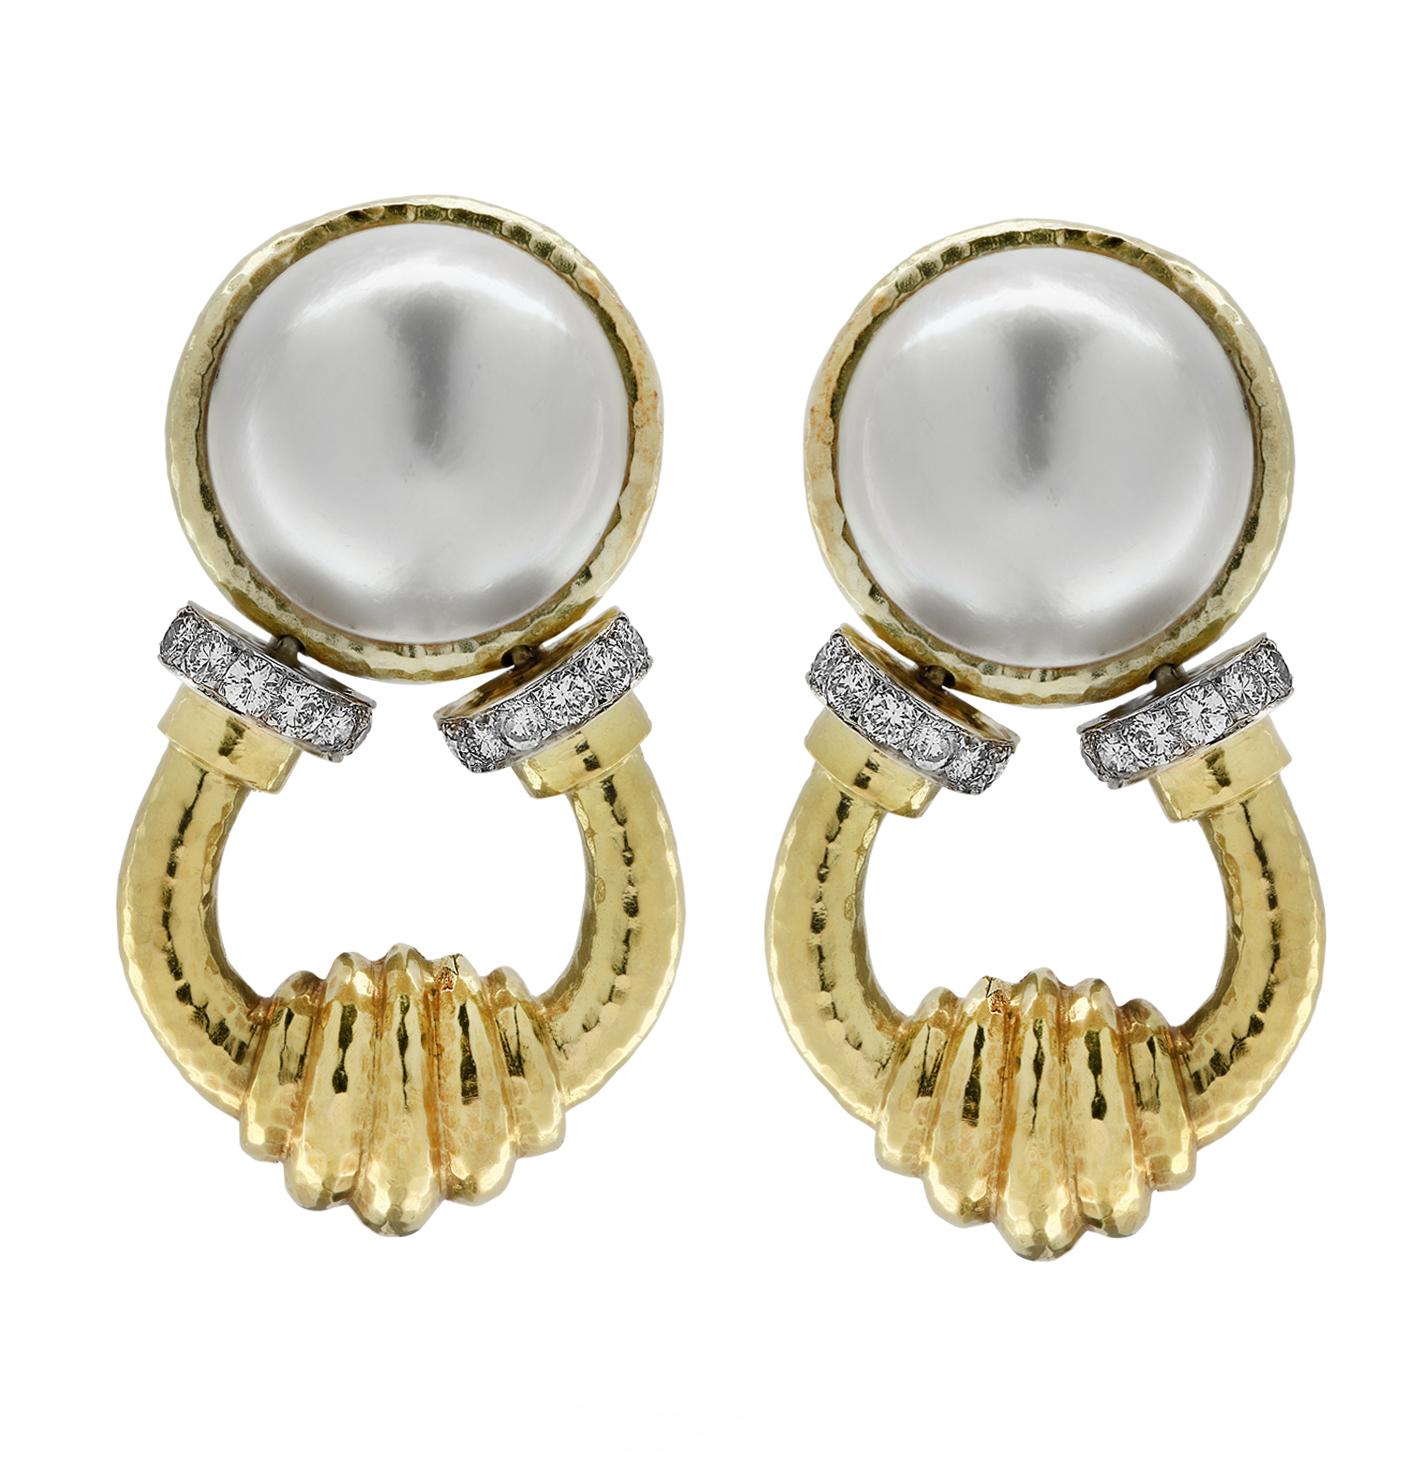 Mabe Pearl and Diamond Door Knocker Earrings im Zustand „Gut“ in Miami, FL